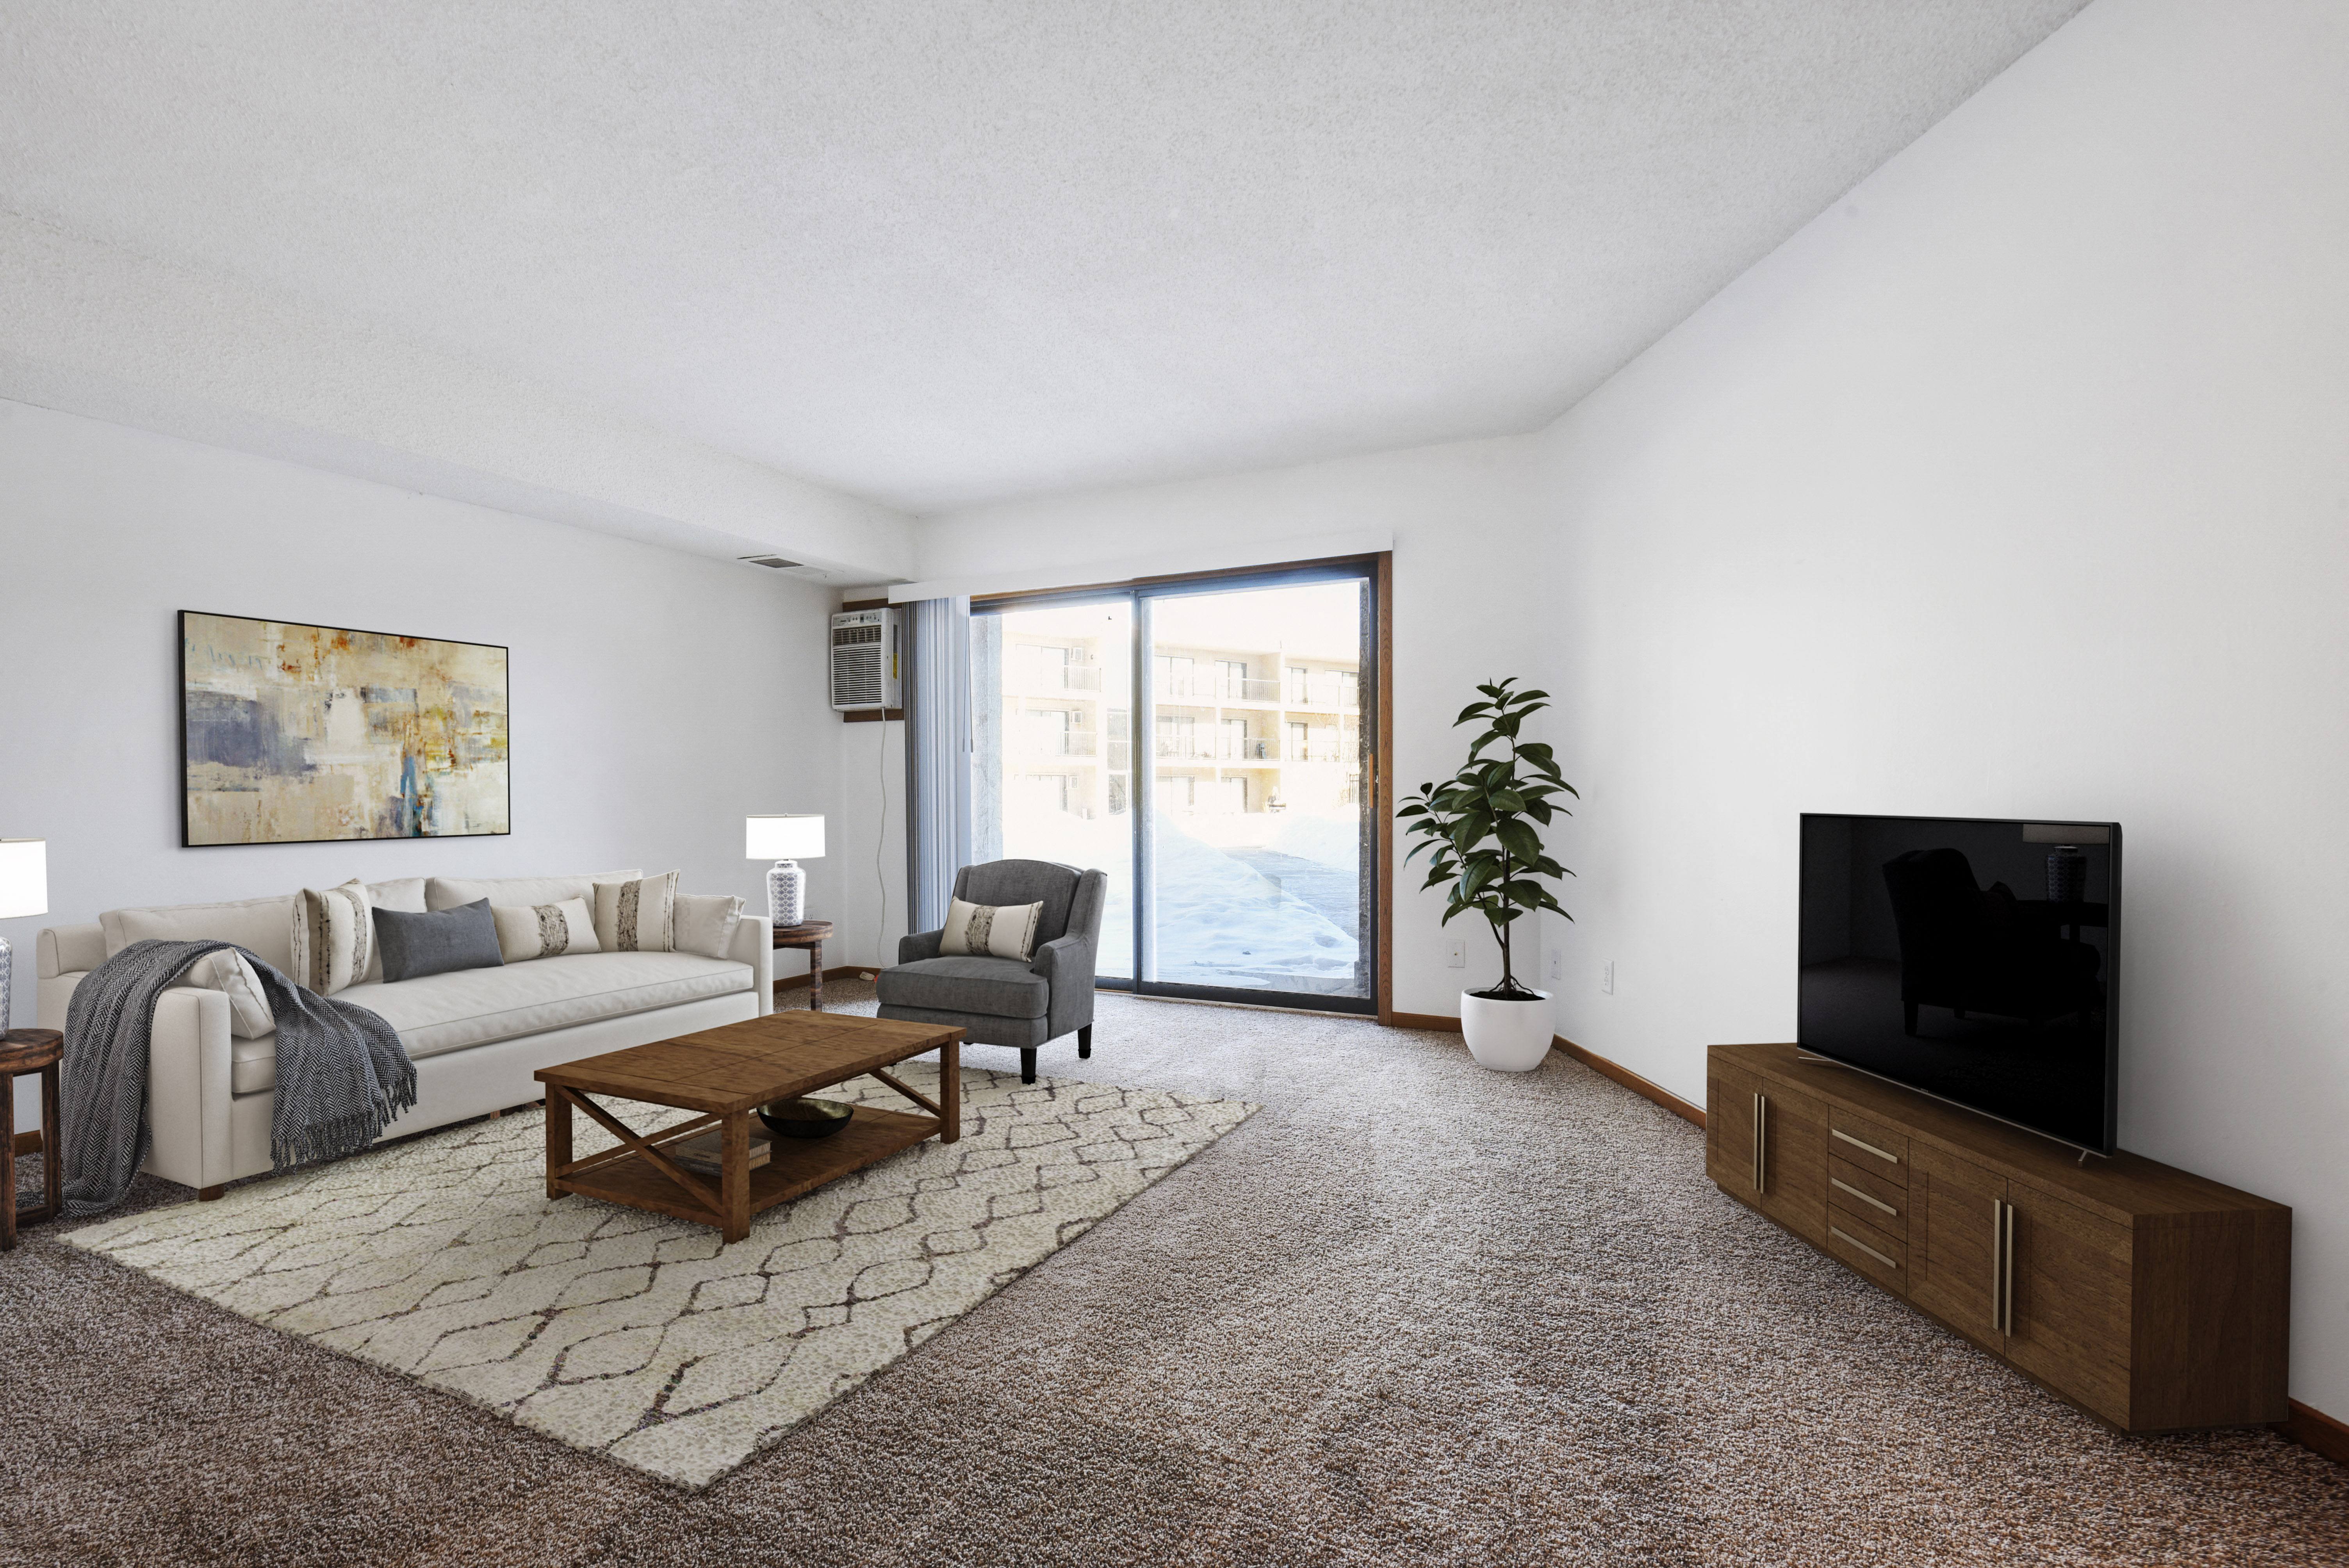 The space is beautifully designed with modern furniture and decor. The living area features a comfortable sofa and stylish coffee table, while the dining area showcases a sleek table and chairs.